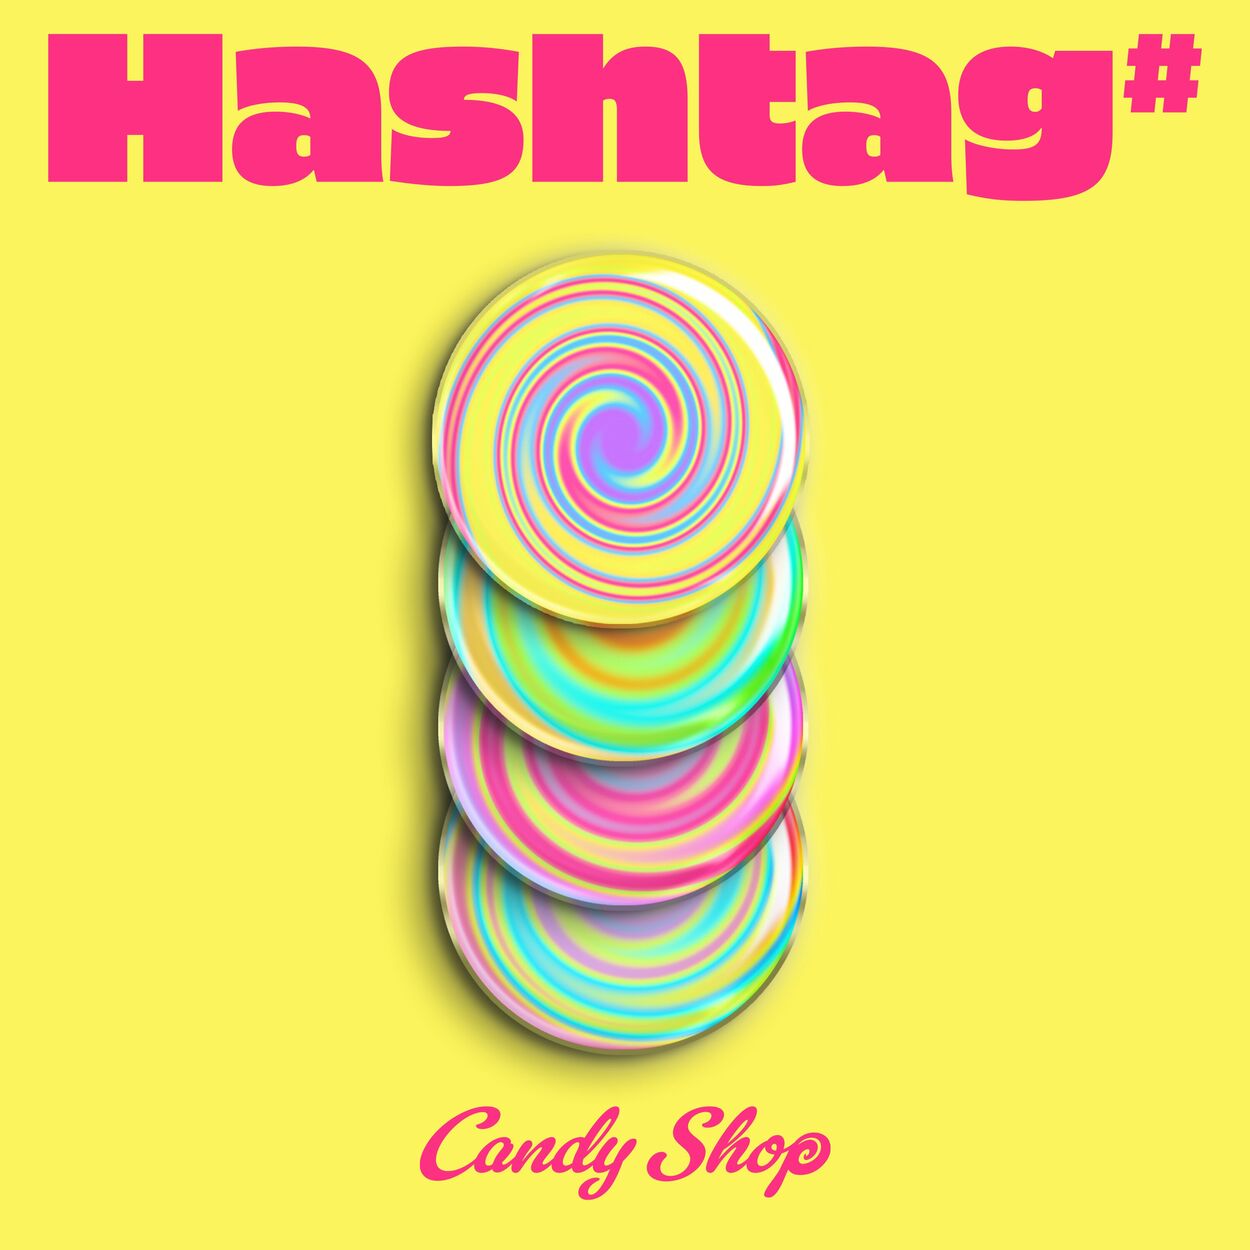 Candy Shop – Hashtag# – EP